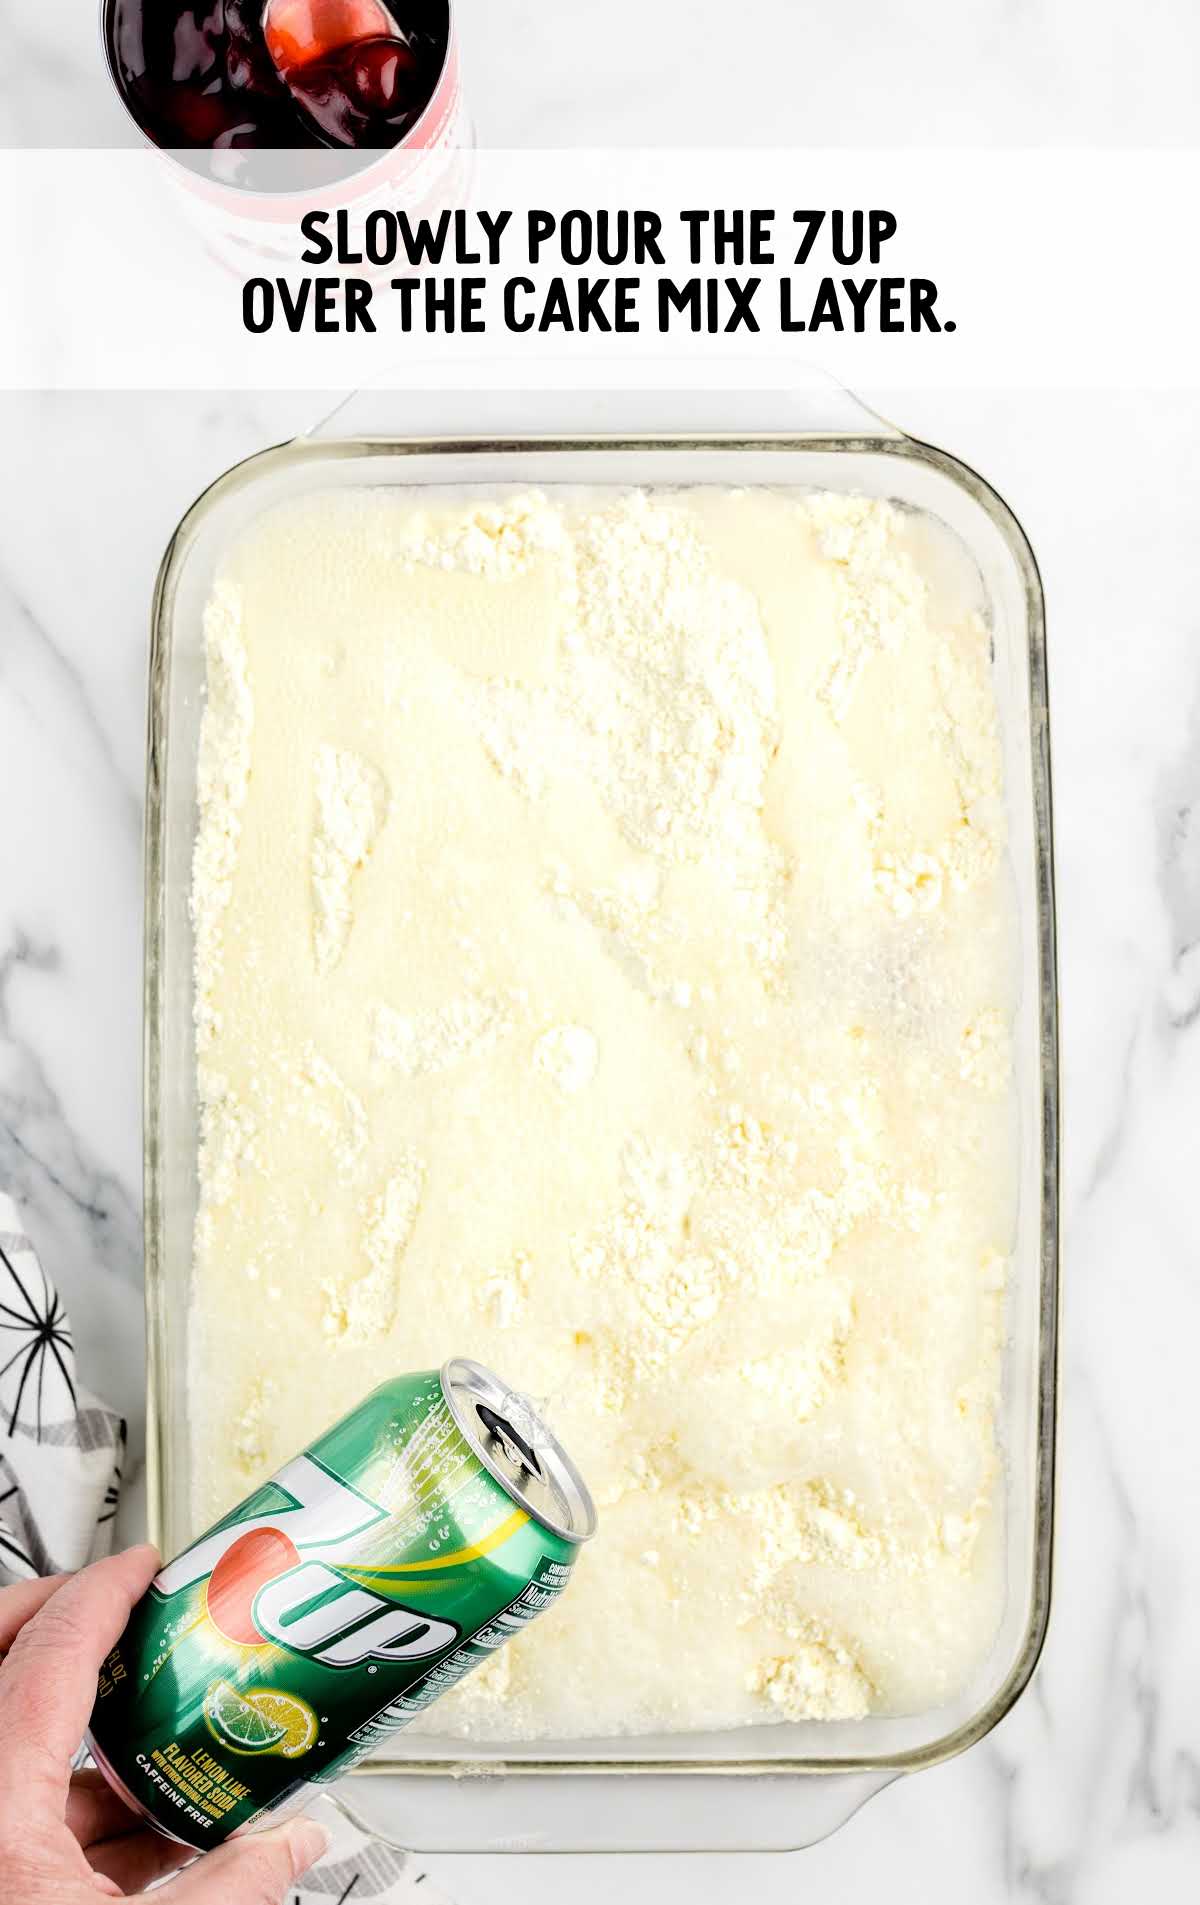 7up poured over the cake mix layer